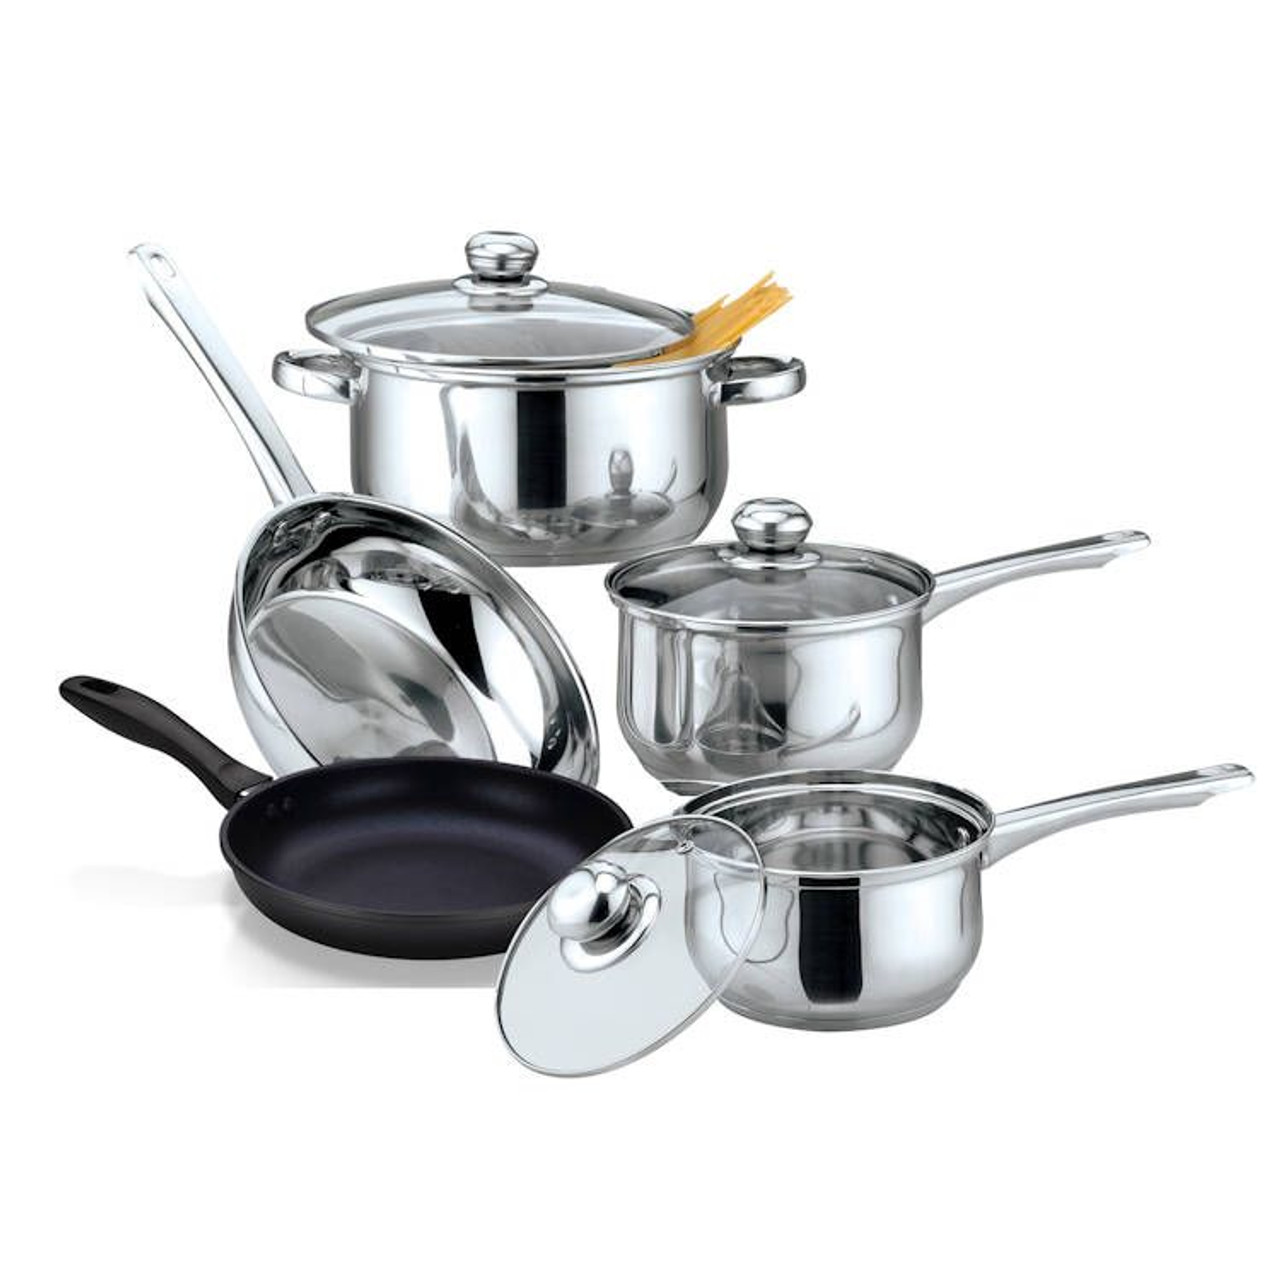 https://cdn11.bigcommerce.com/s-q0oajb576s/images/stencil/1280x1280/products/1338/3671/gourmet-edge-premium-8-piece-stainless-steel-cookware-sets-with-nonstick-fry-pan-4__86703.1637184376.jpg?c=1?imbypass=on